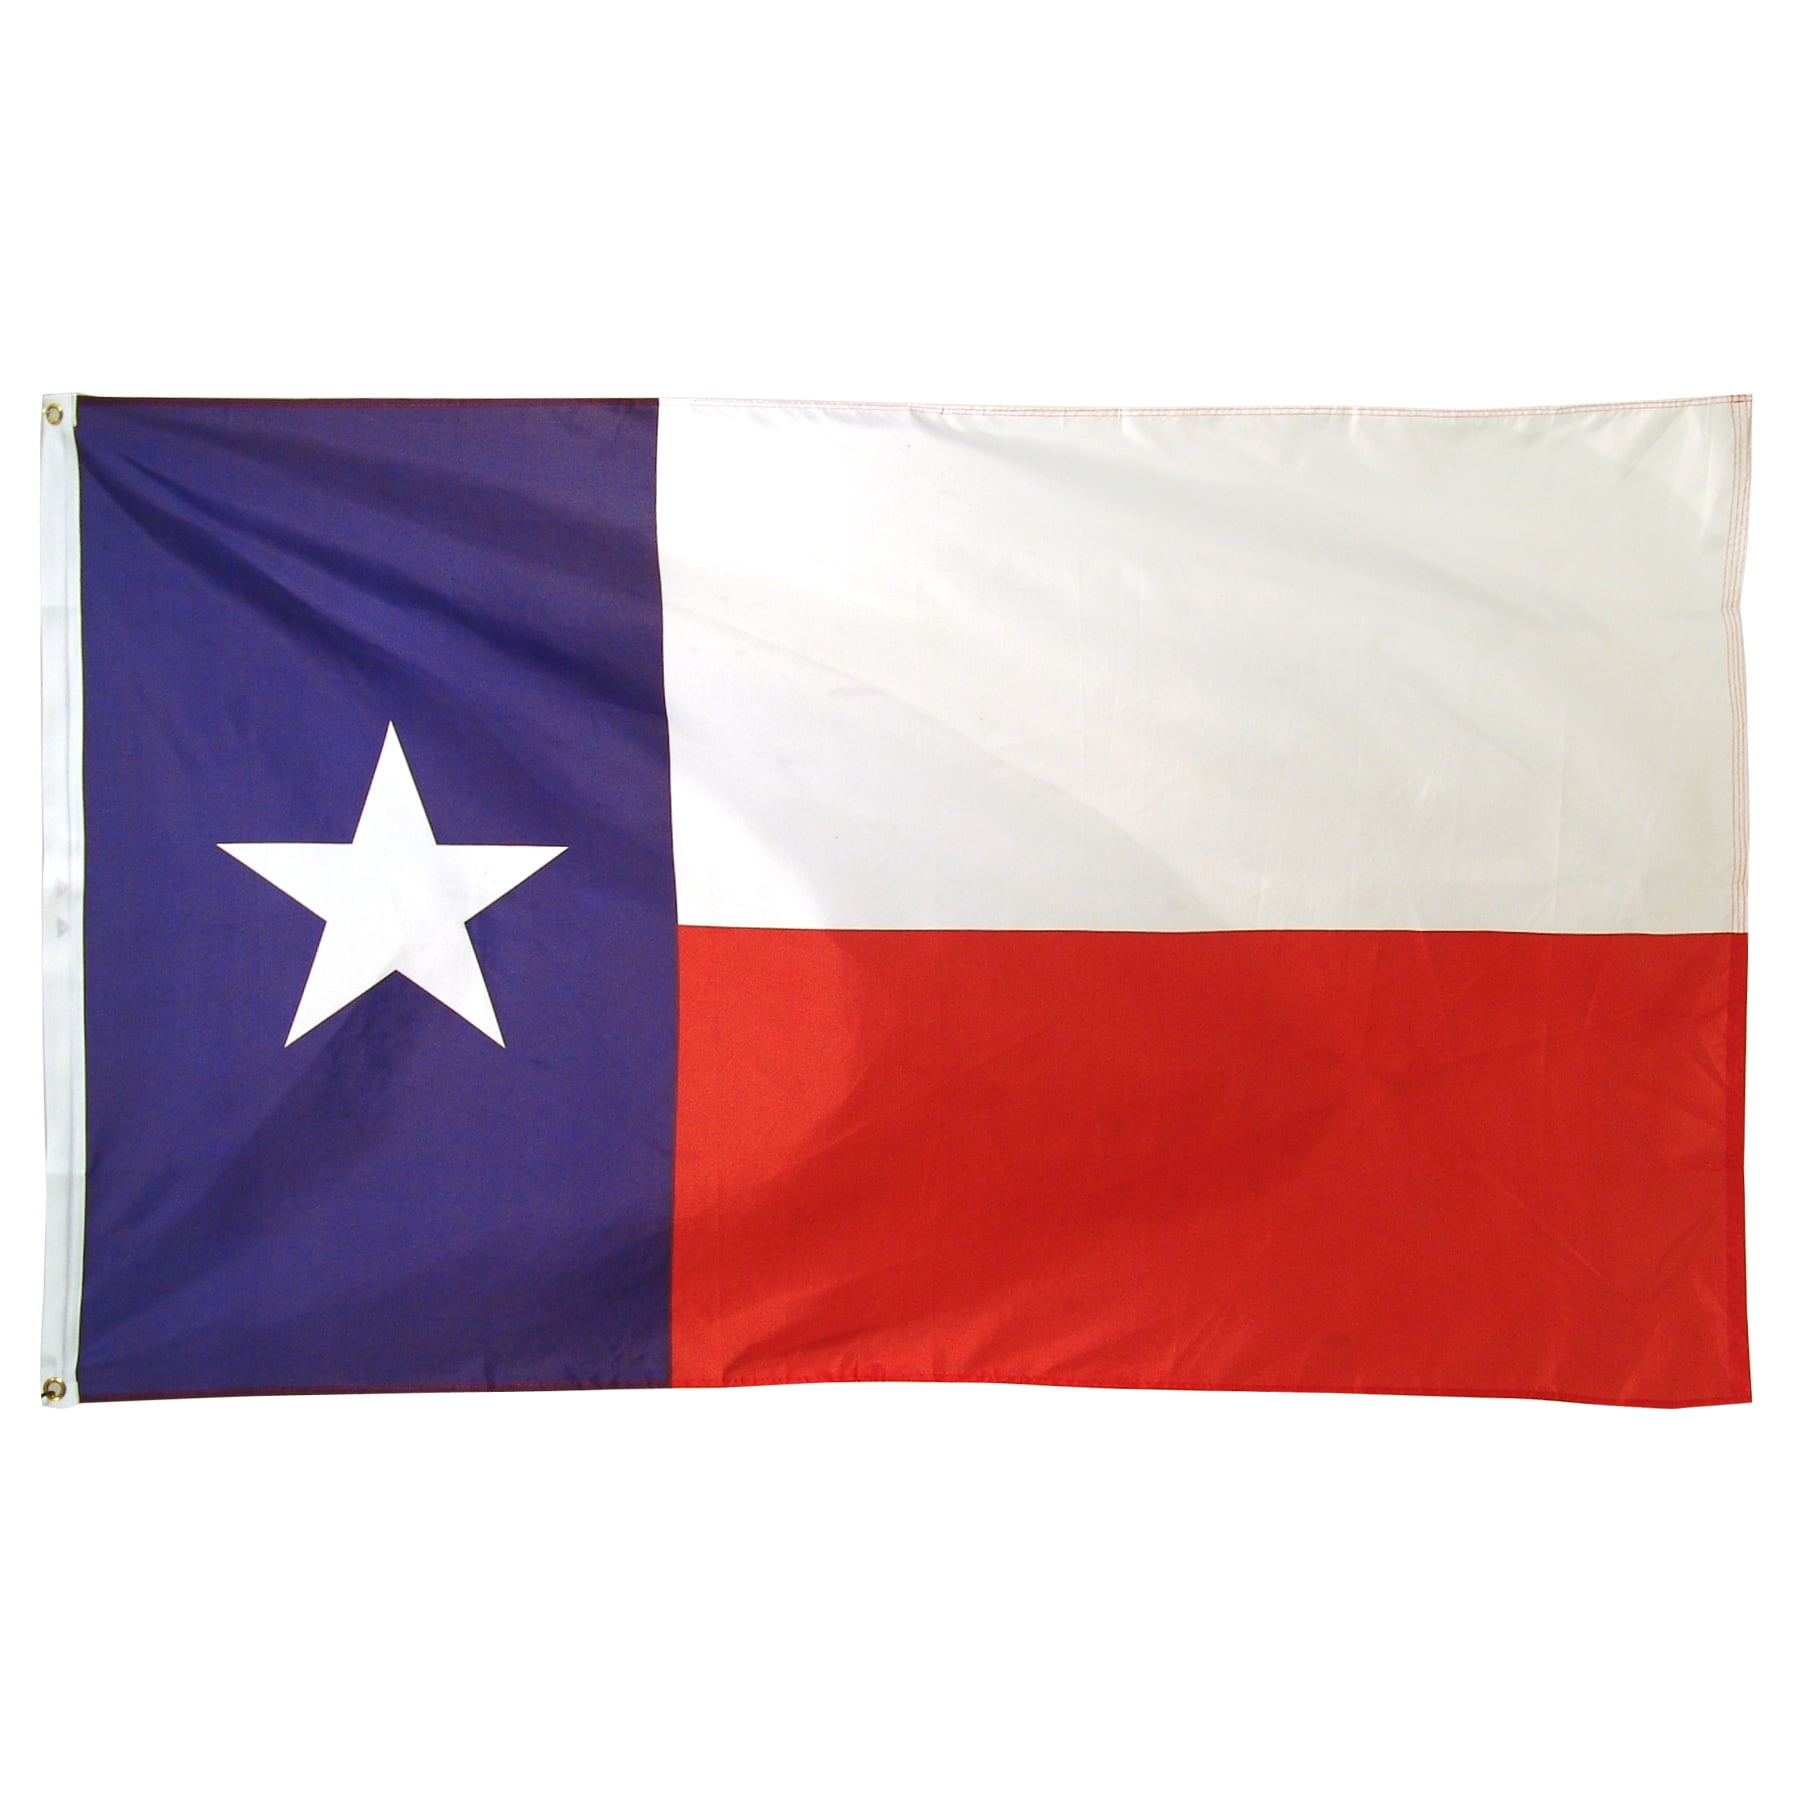 RUF 4'x6' 210D Nylon Embroidered Flag 2 Clips Details about   4x6 Texas State Fully Emb Star 